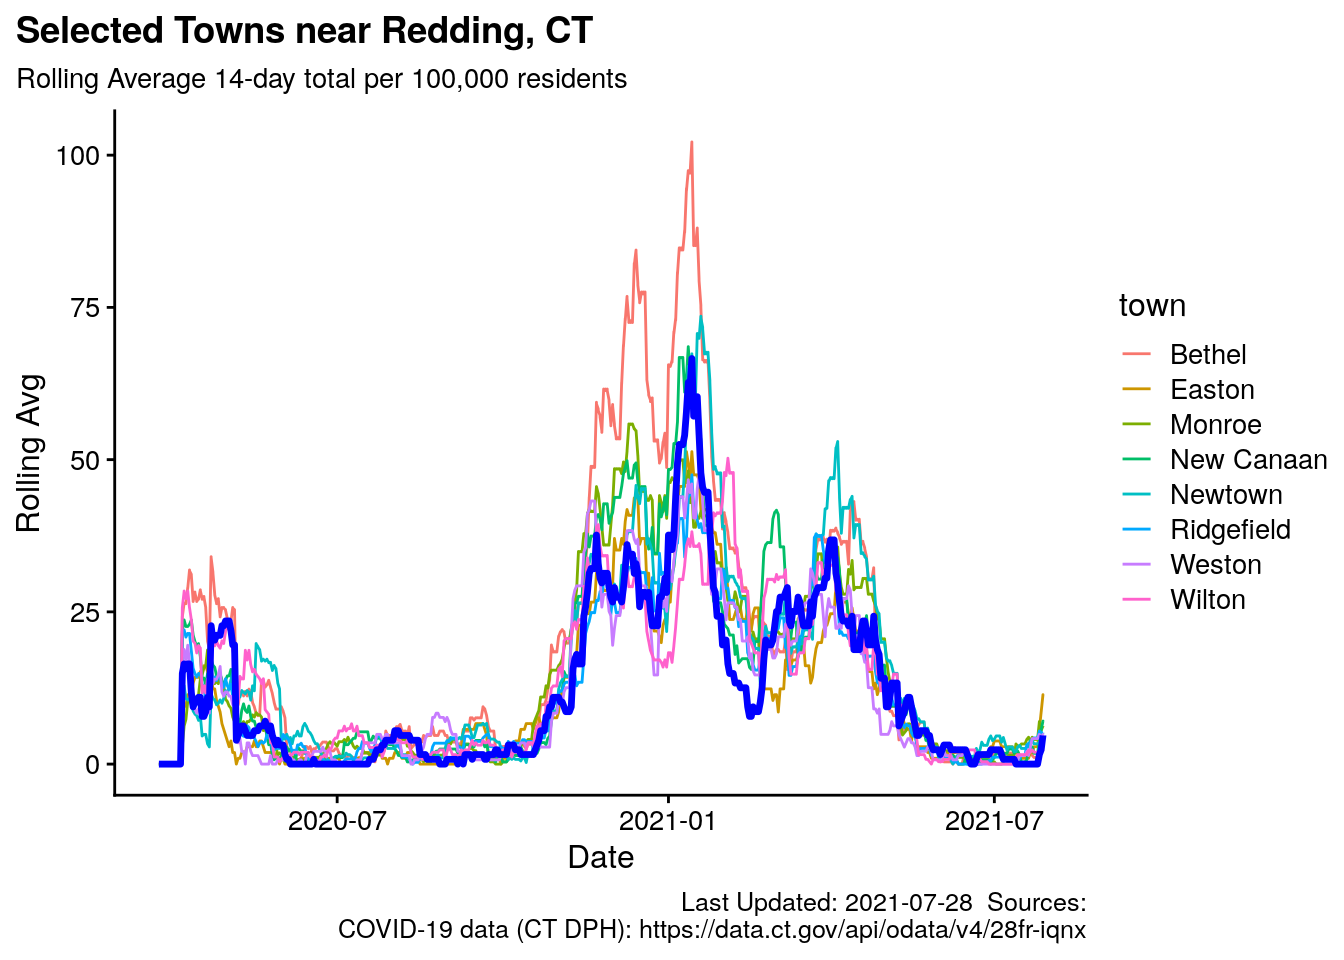 Redding and surrounding towns, rolling average